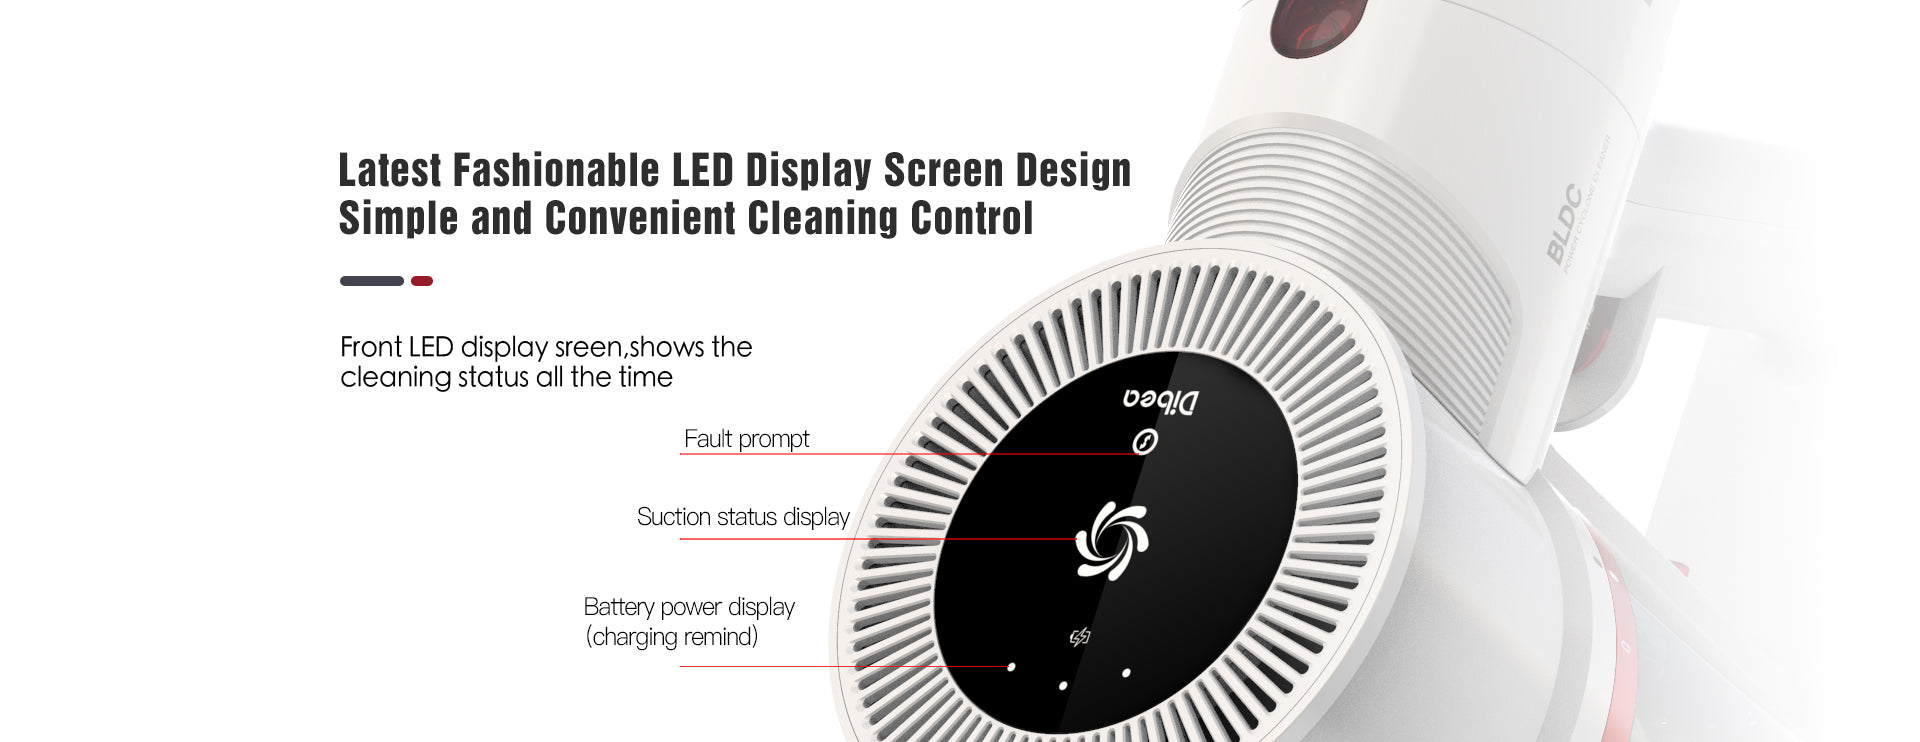 Latest_Fashionable_LED_Display_Screen_DesignSimple_and_Convenient_Cleaning_Control